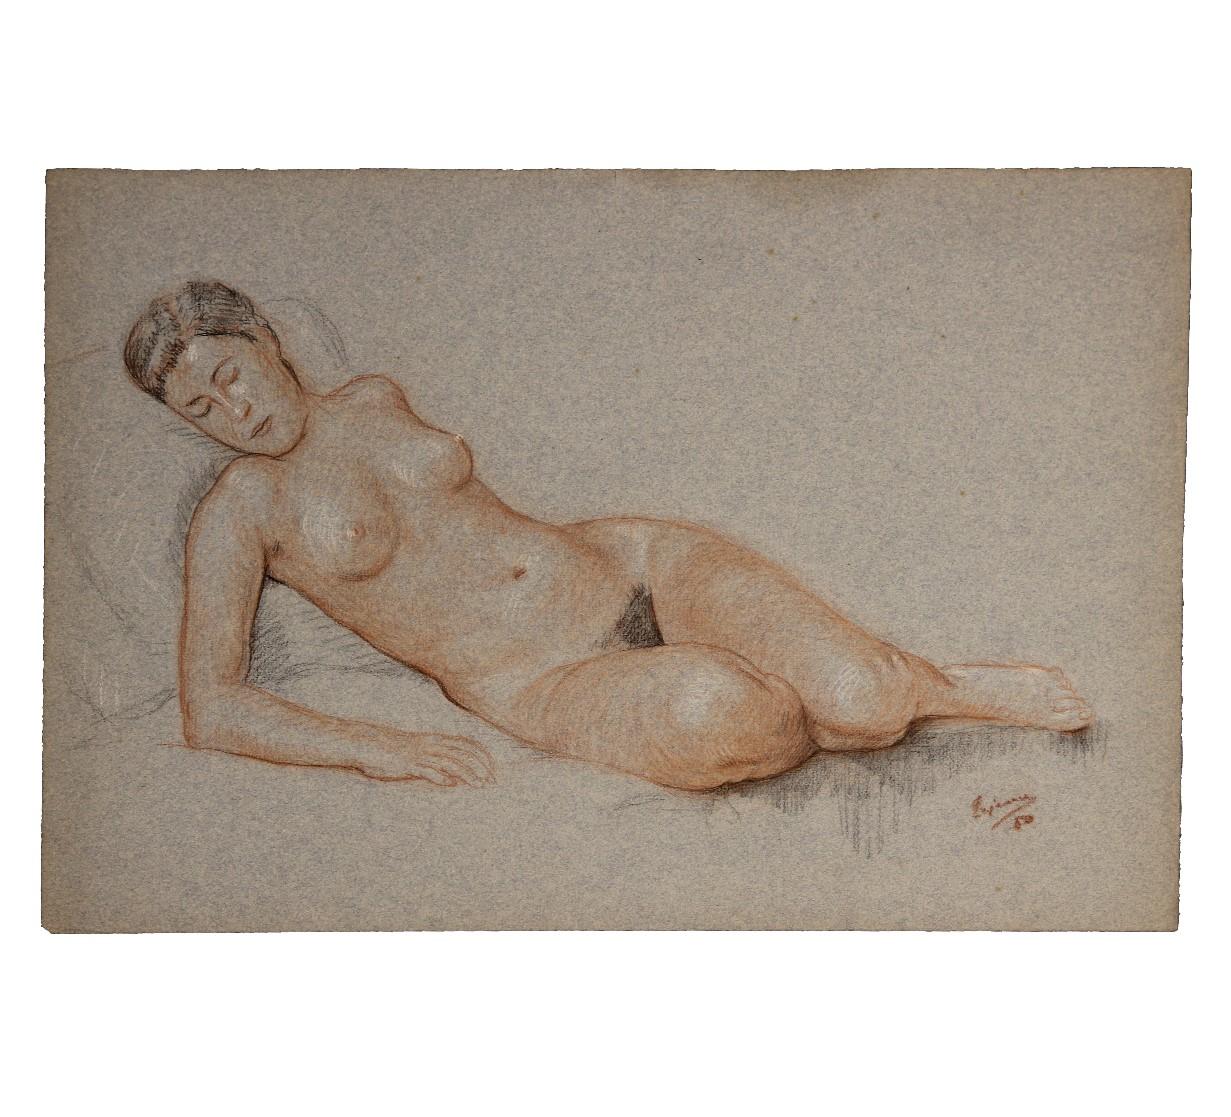 Naturalistic Study of a Reclining Nude Woman